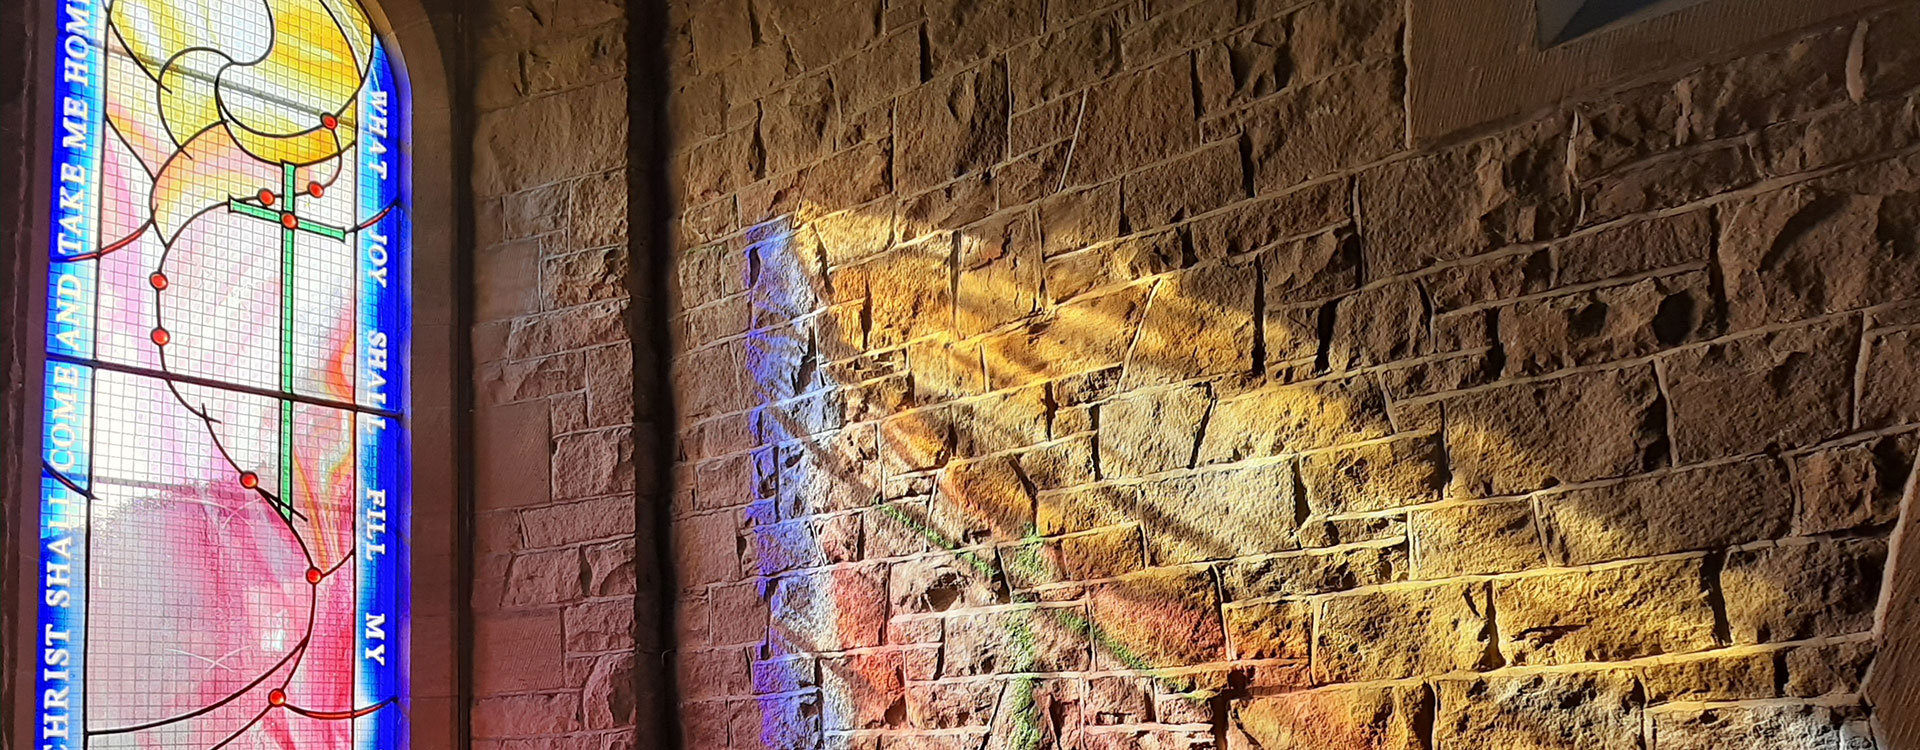 Light through stained glass window